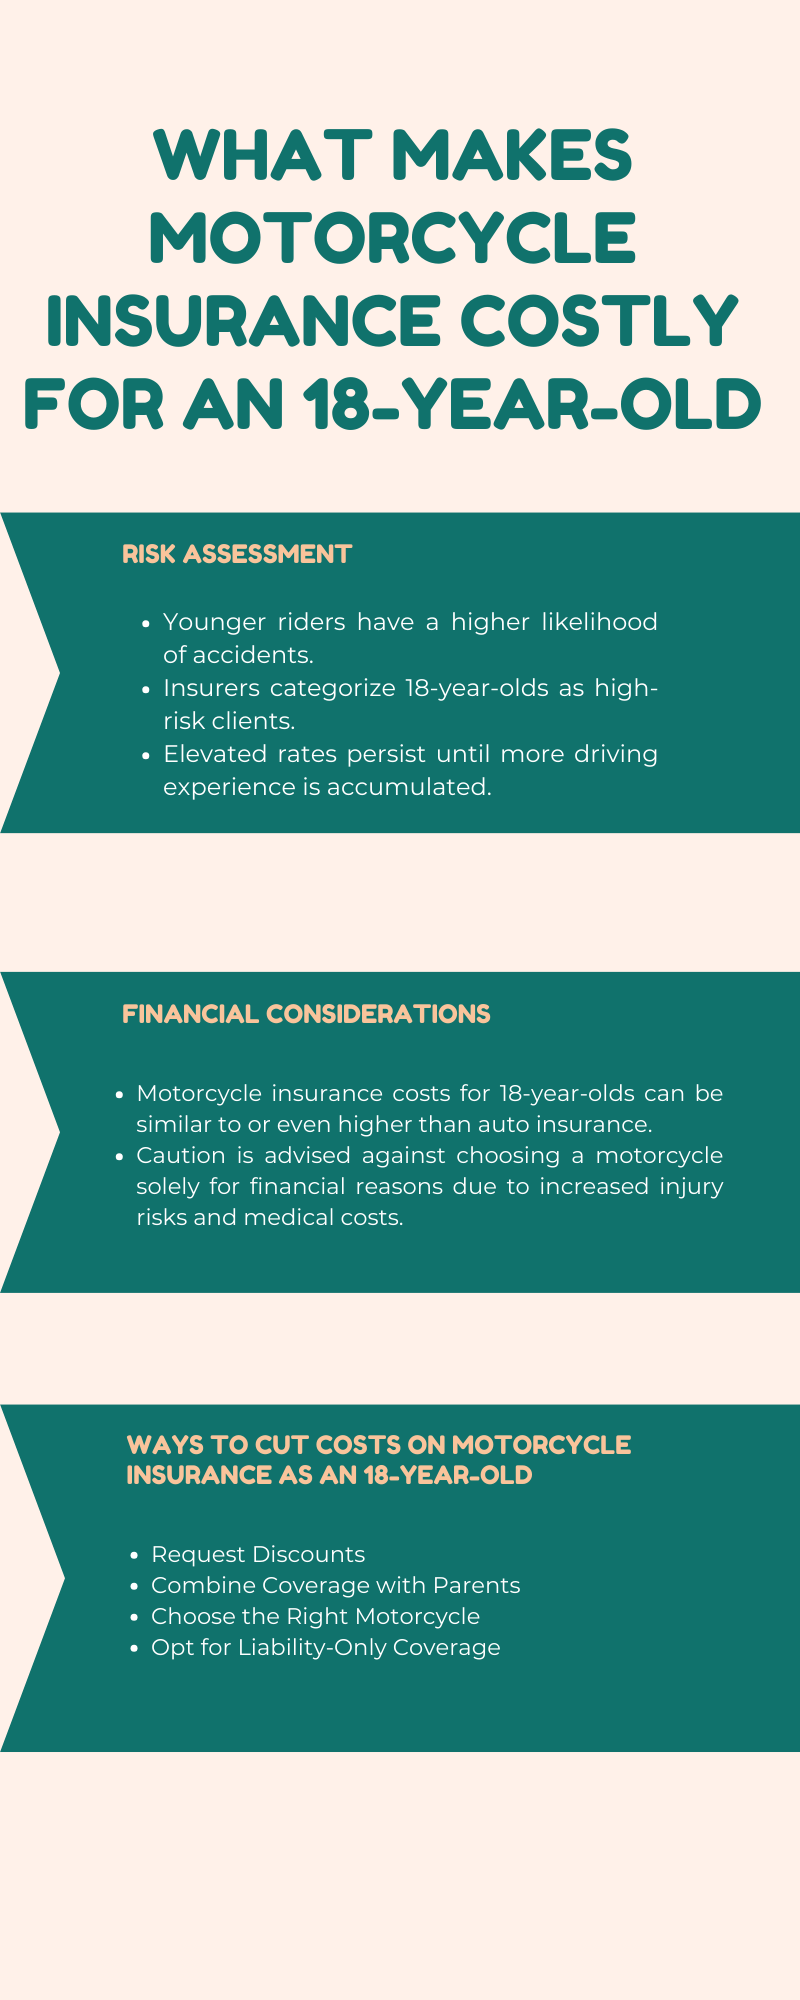 An infographic illustration of What Makes Motorcycle Insurance Costly for an 18-Year-Old